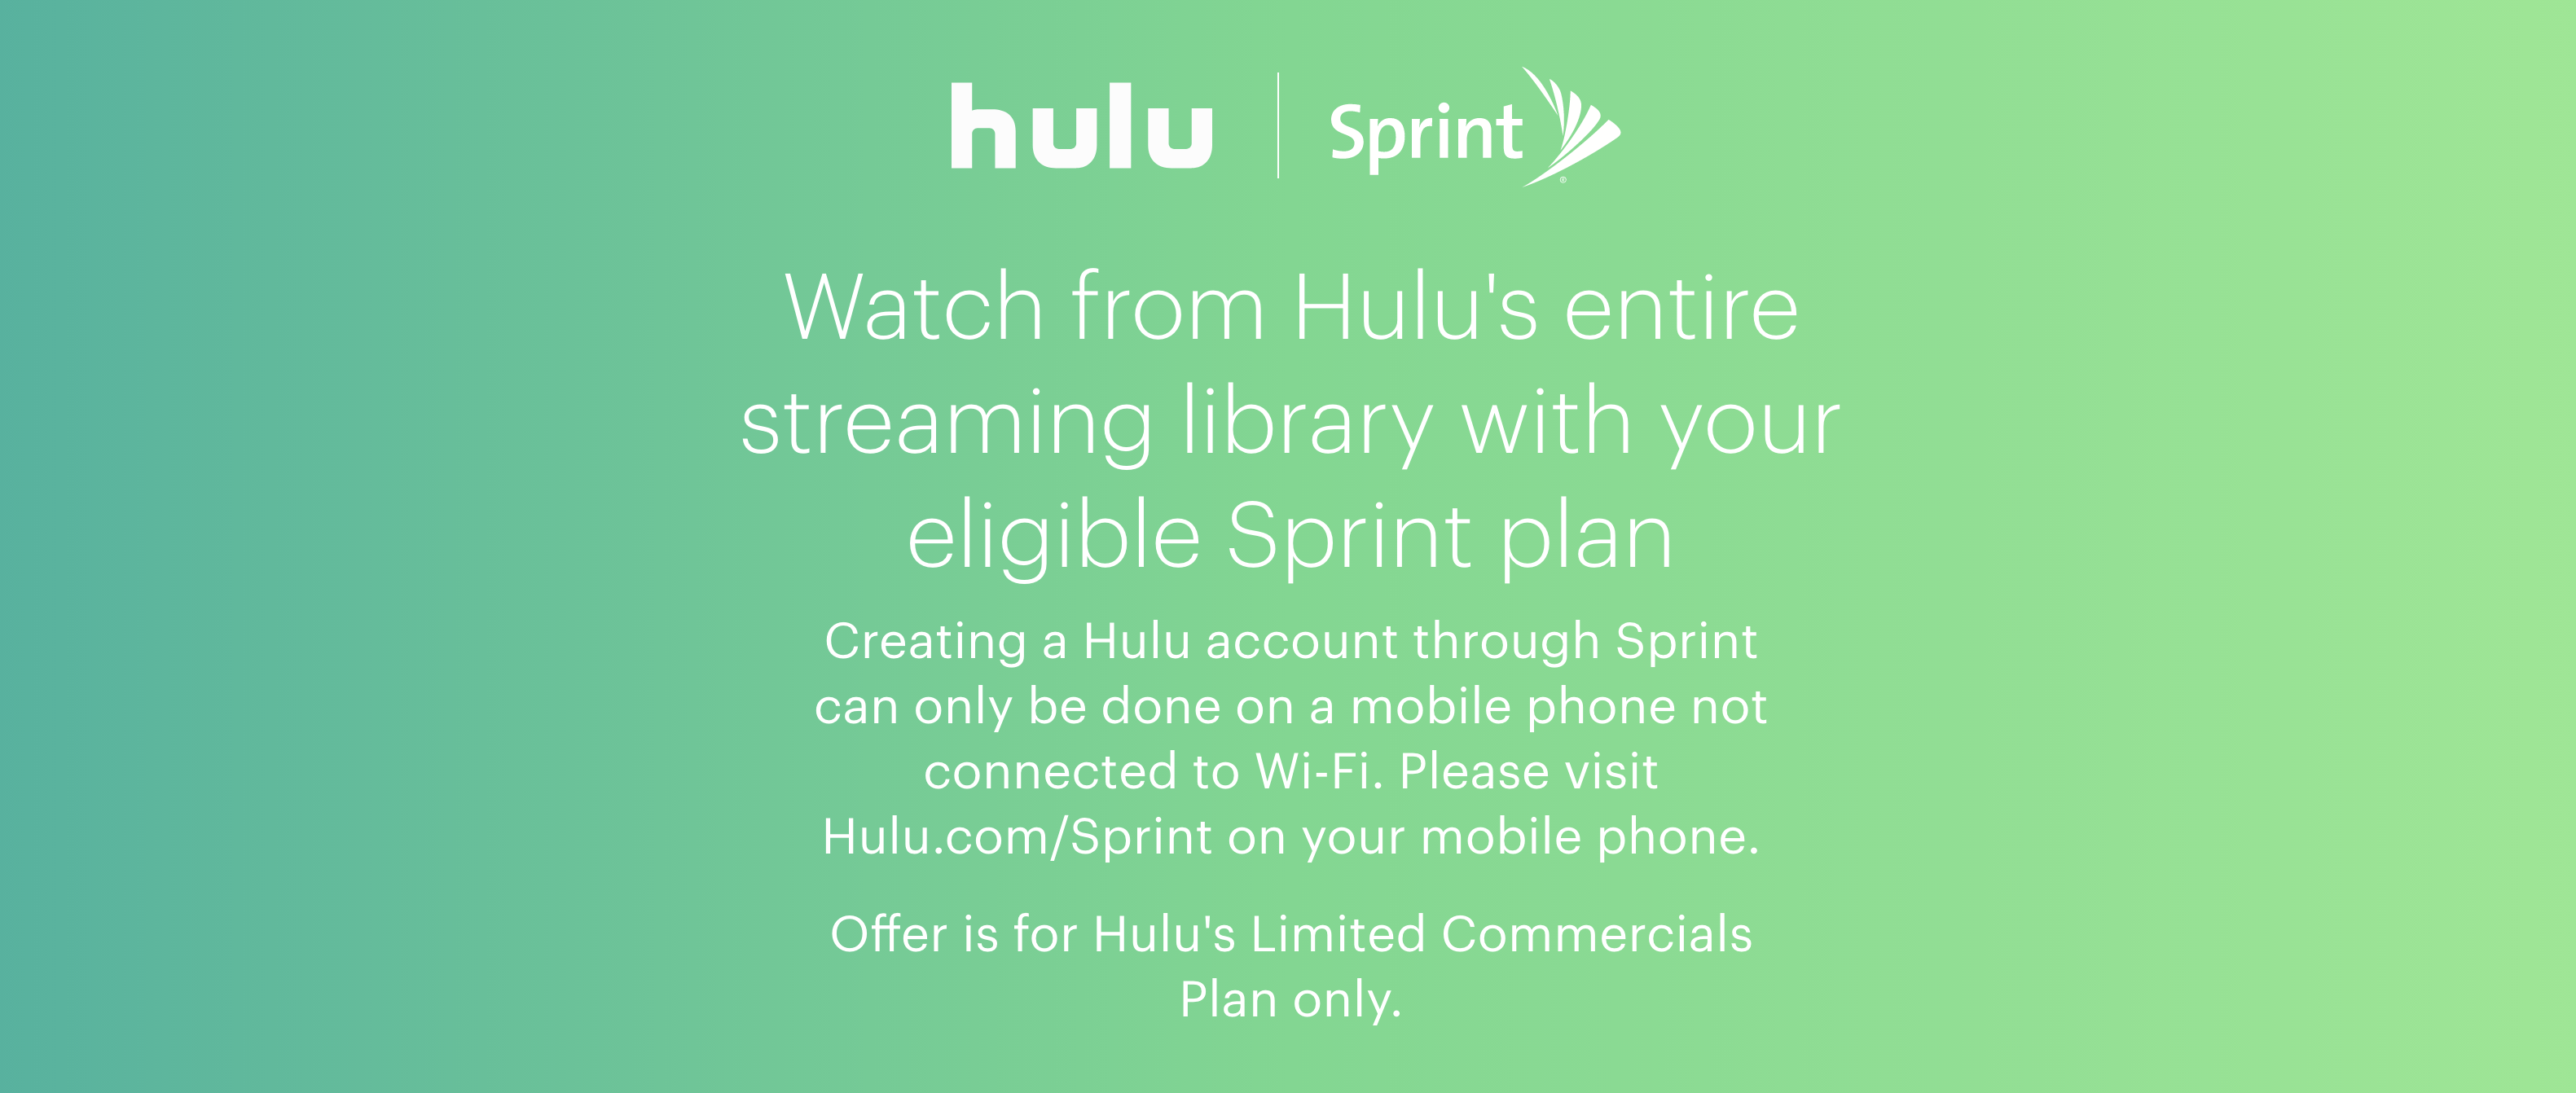 How to Get Hulu for Free With Sprint How It Works and FAQs (Jan